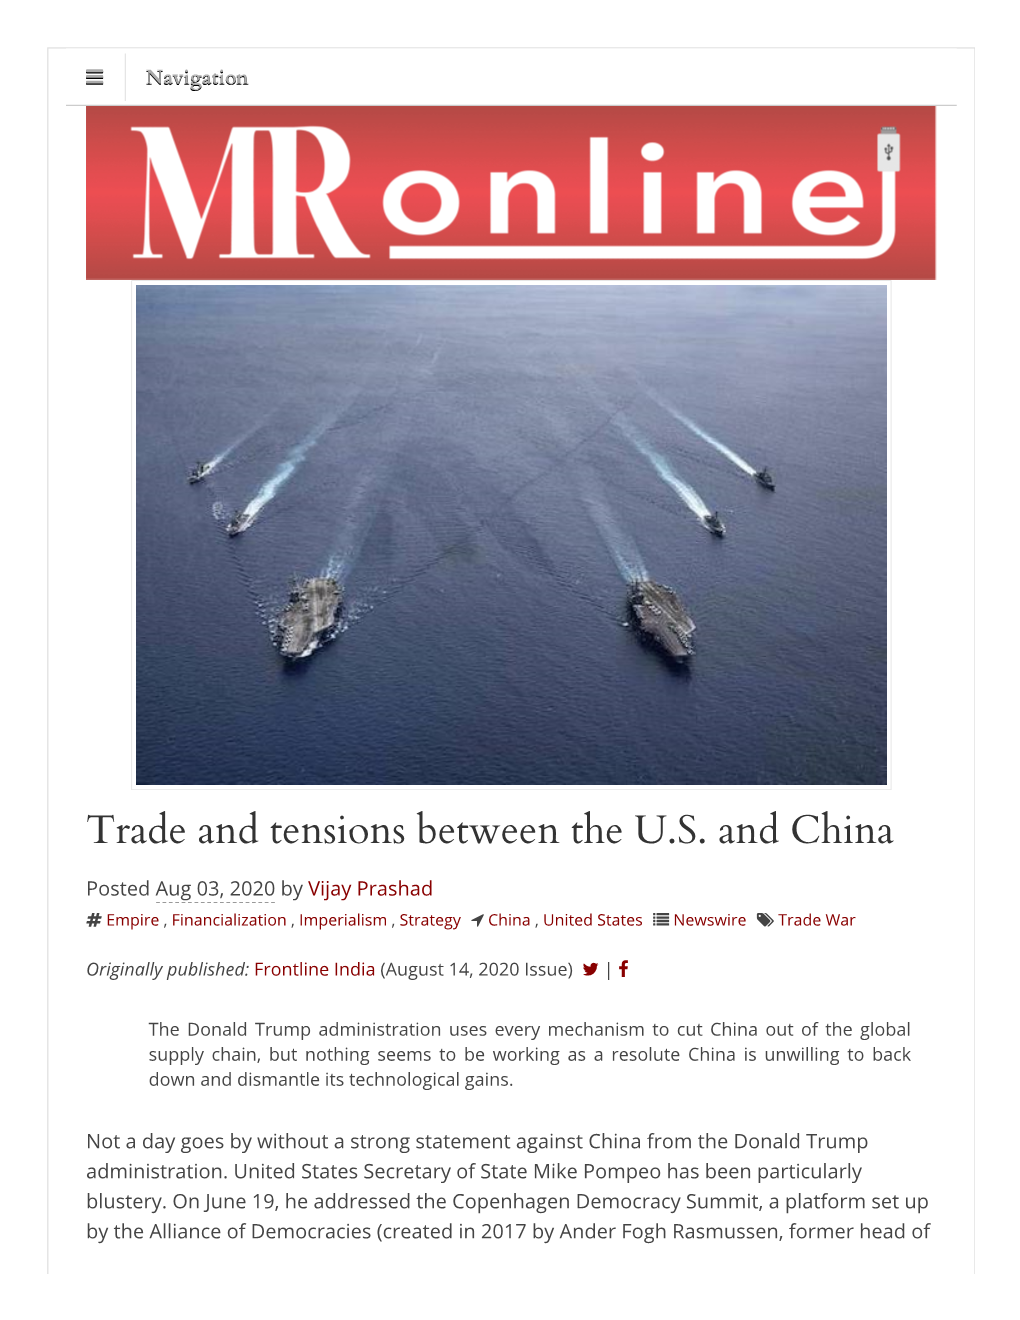 Trade and Tensions Between the U.S. and China